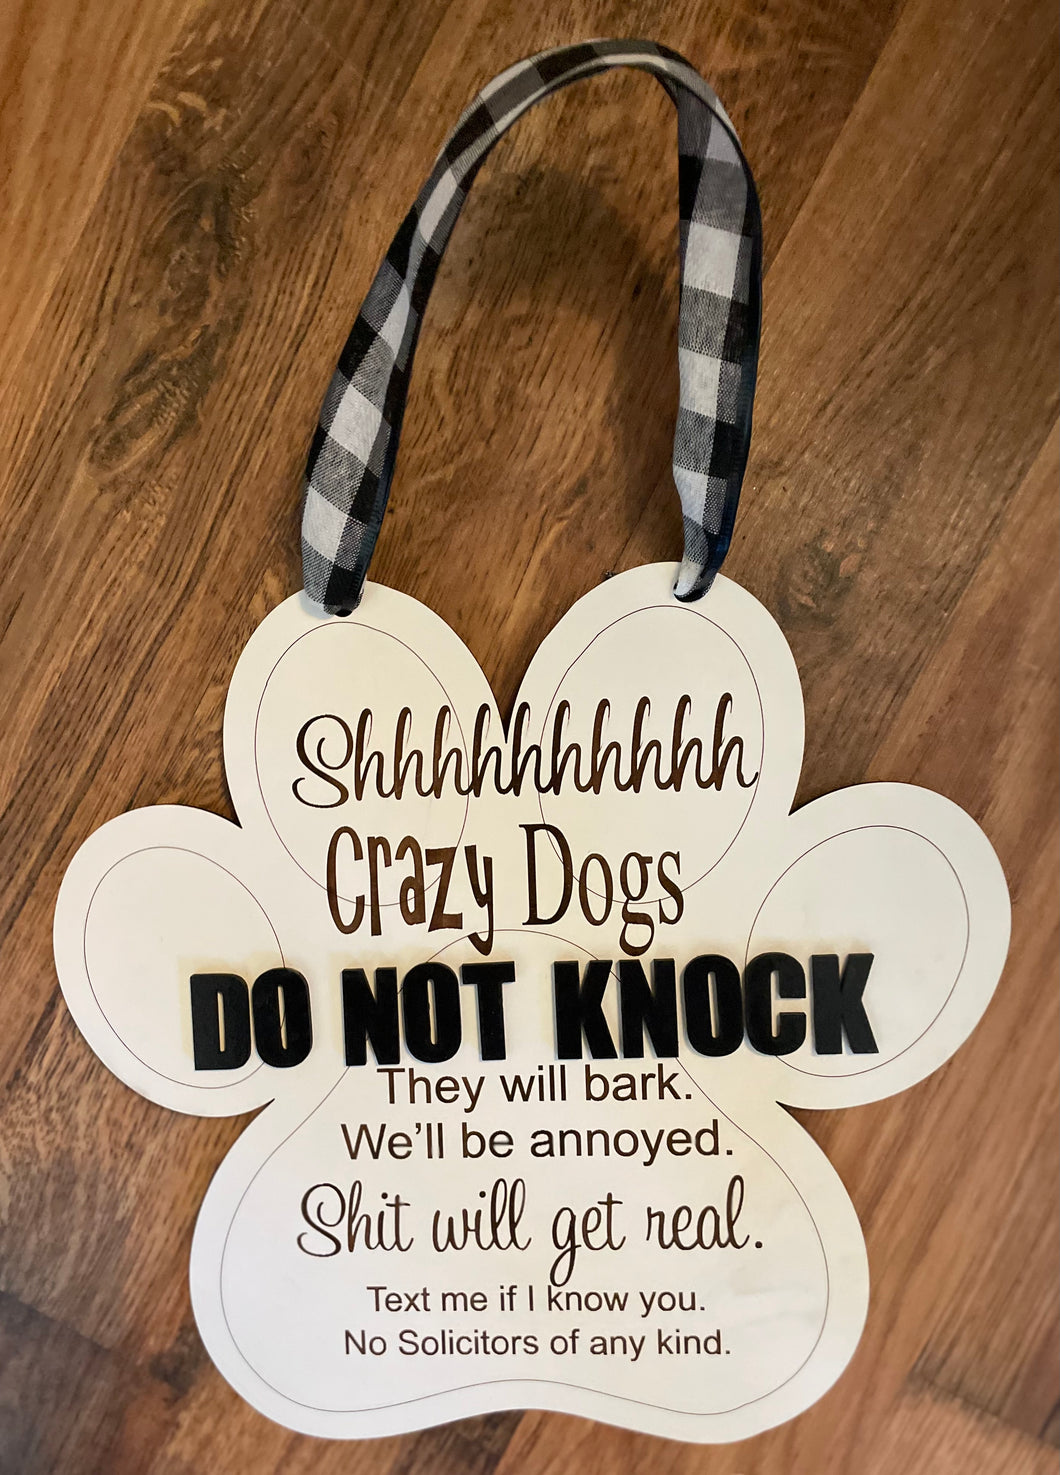 Crazy Dogs sign